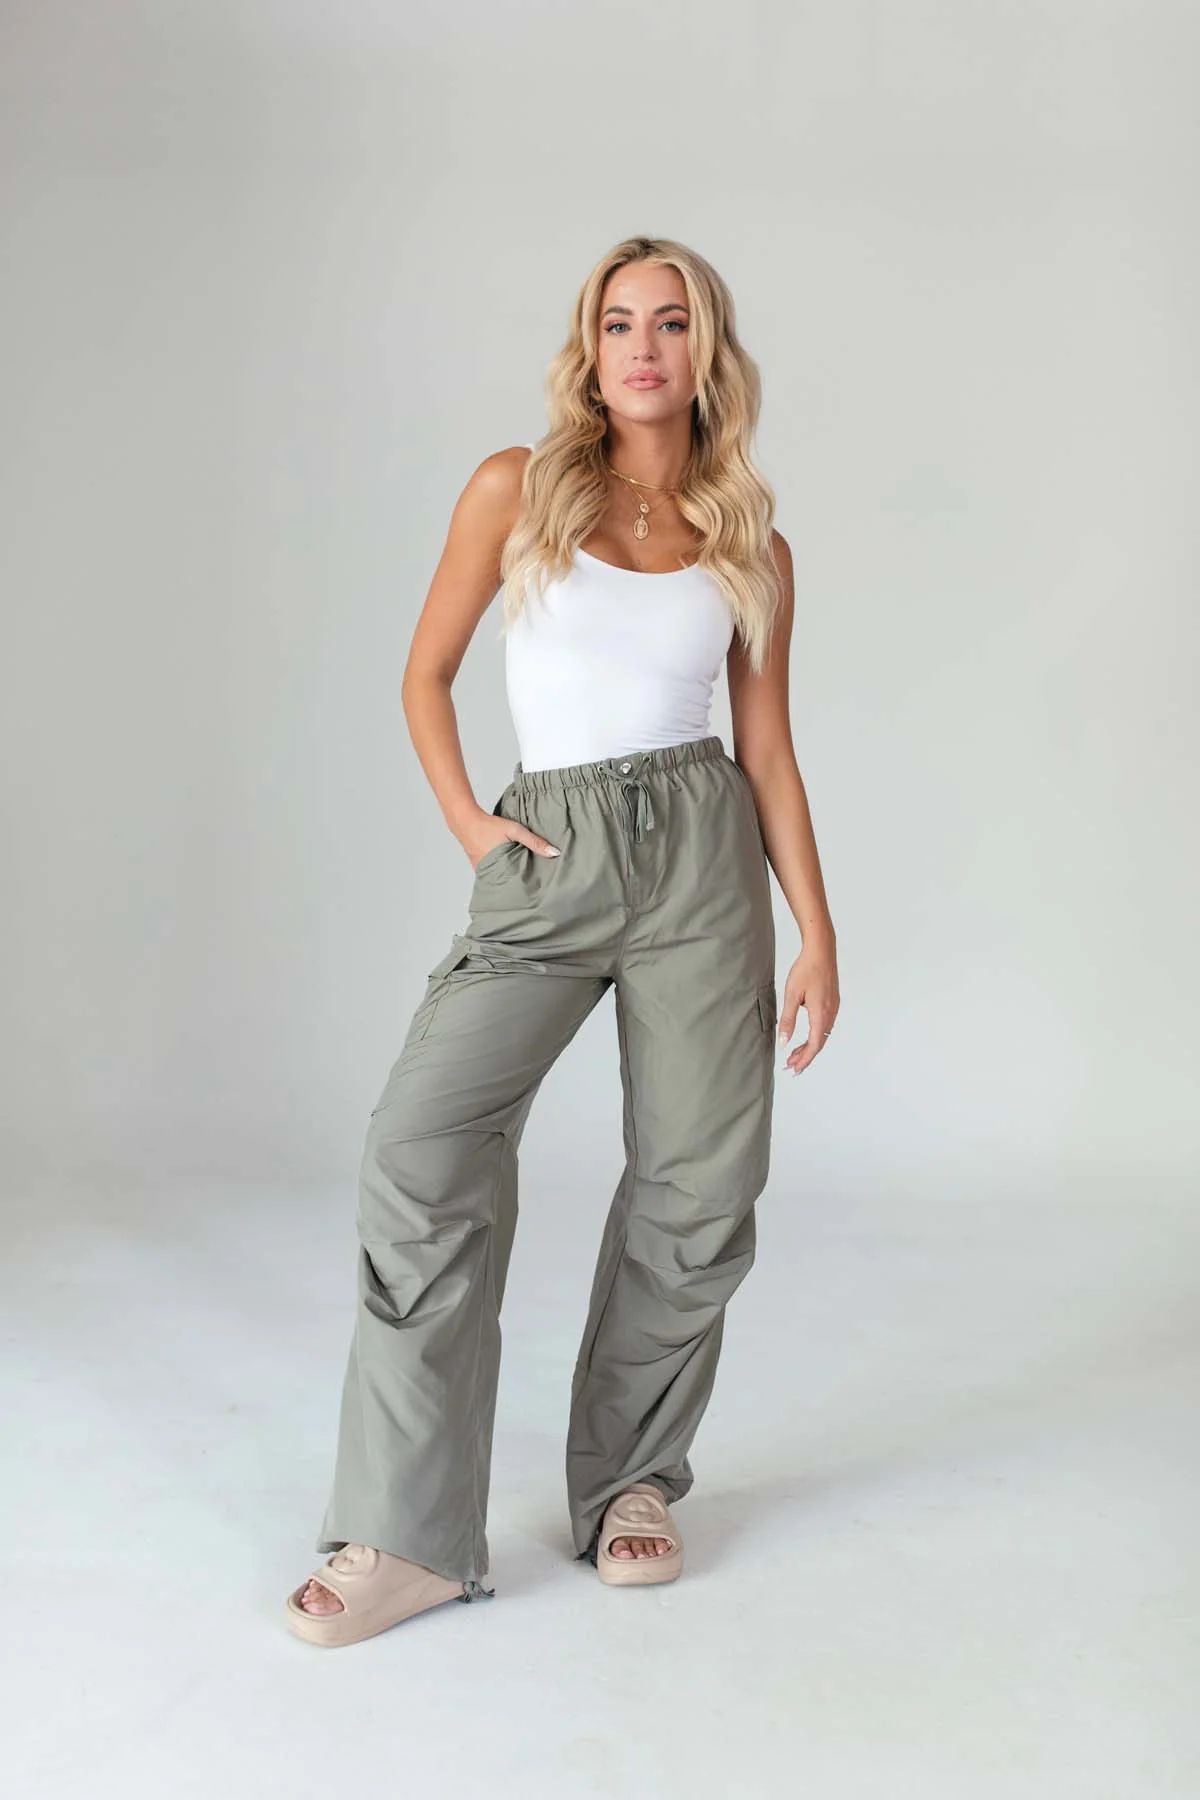 Next Level Olive Cargo Pants | The Post